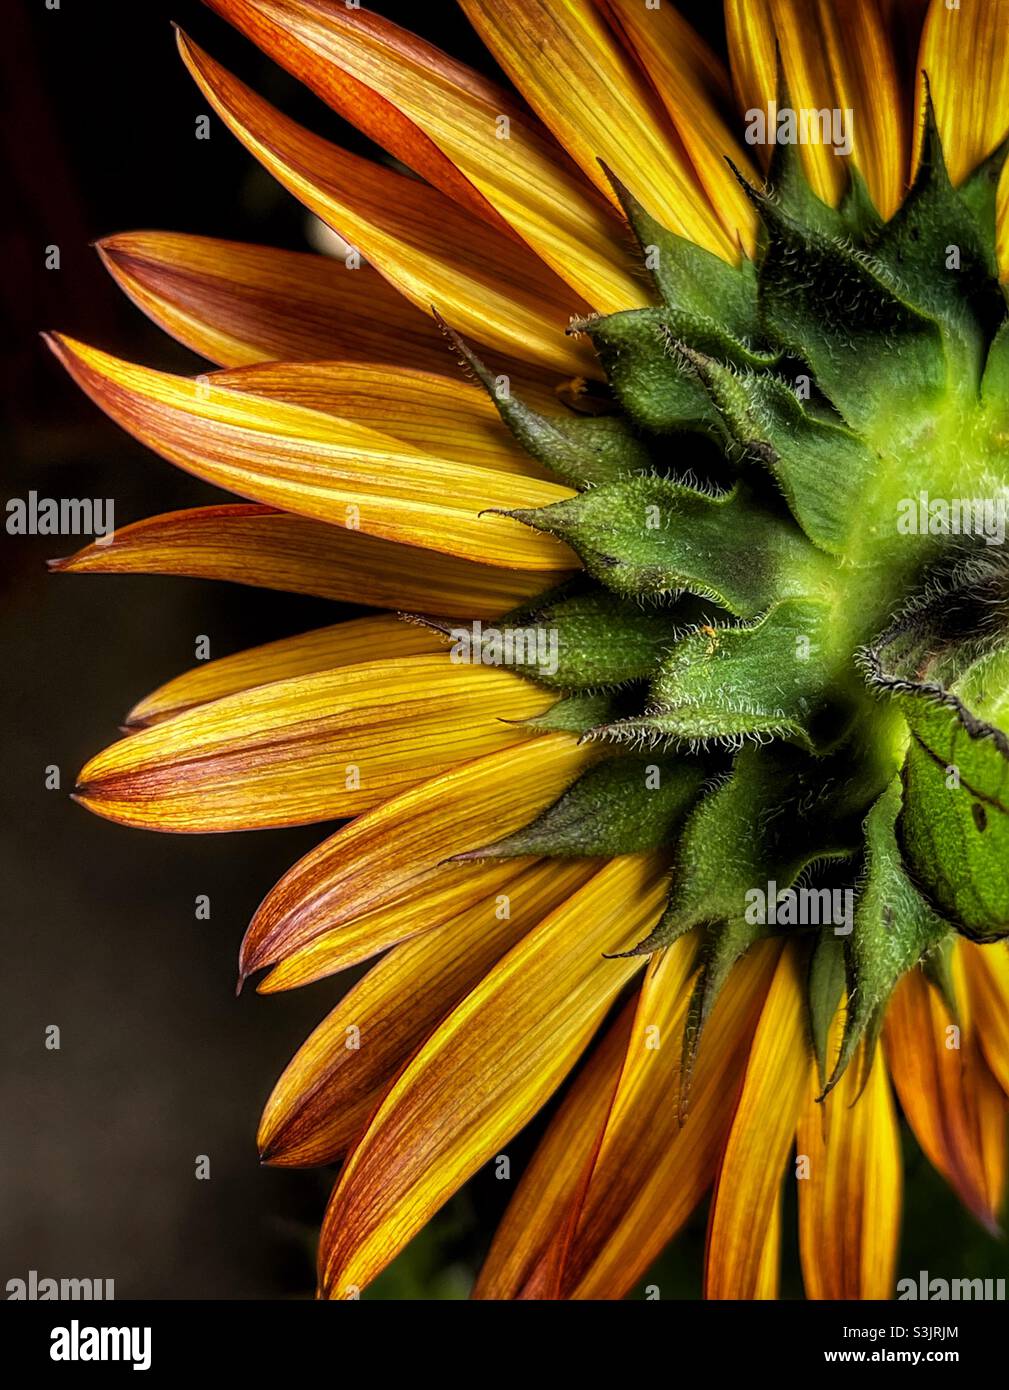 Backside of a sunflower Stock Photo